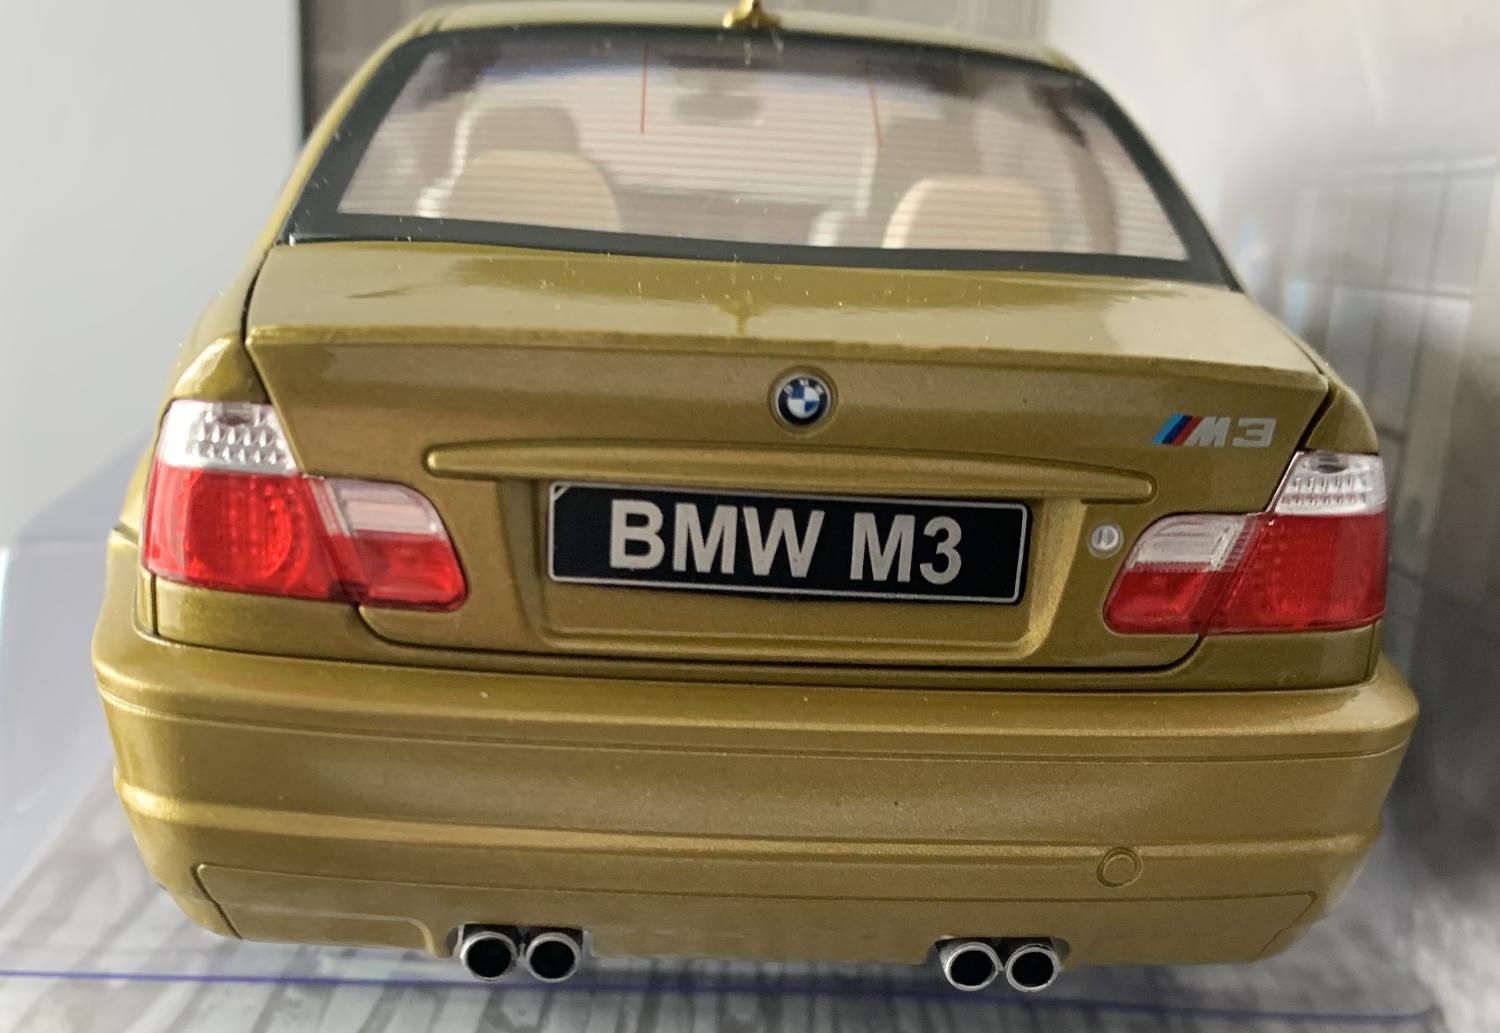 A very good representation of the BMW E46 Coupe M3 decorated in phoenix yellow with alloy wheels.